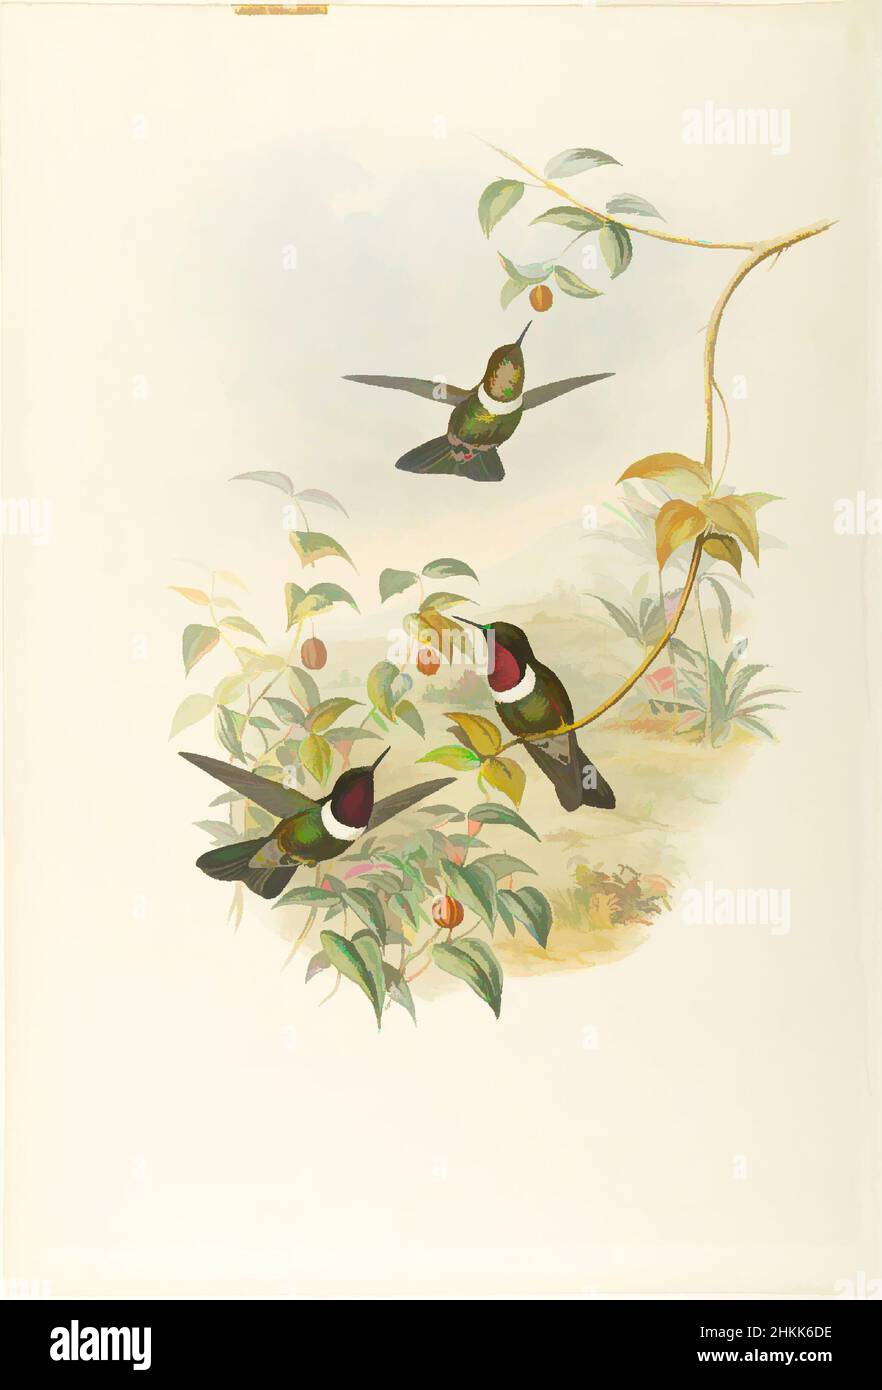 Art inspired by Heliangelus Spencei: Spenser's Sun Angel, John Gould, British, 1804-1881, Lithograph in color on wove paper, 21 1/2 x 14 3/8 in., 54.6 x 36.5 cm, Classic works modernized by Artotop with a splash of modernity. Shapes, color and value, eye-catching visual impact on art. Emotions through freedom of artworks in a contemporary way. A timeless message pursuing a wildly creative new direction. Artists turning to the digital medium and creating the Artotop NFT Stock Photo